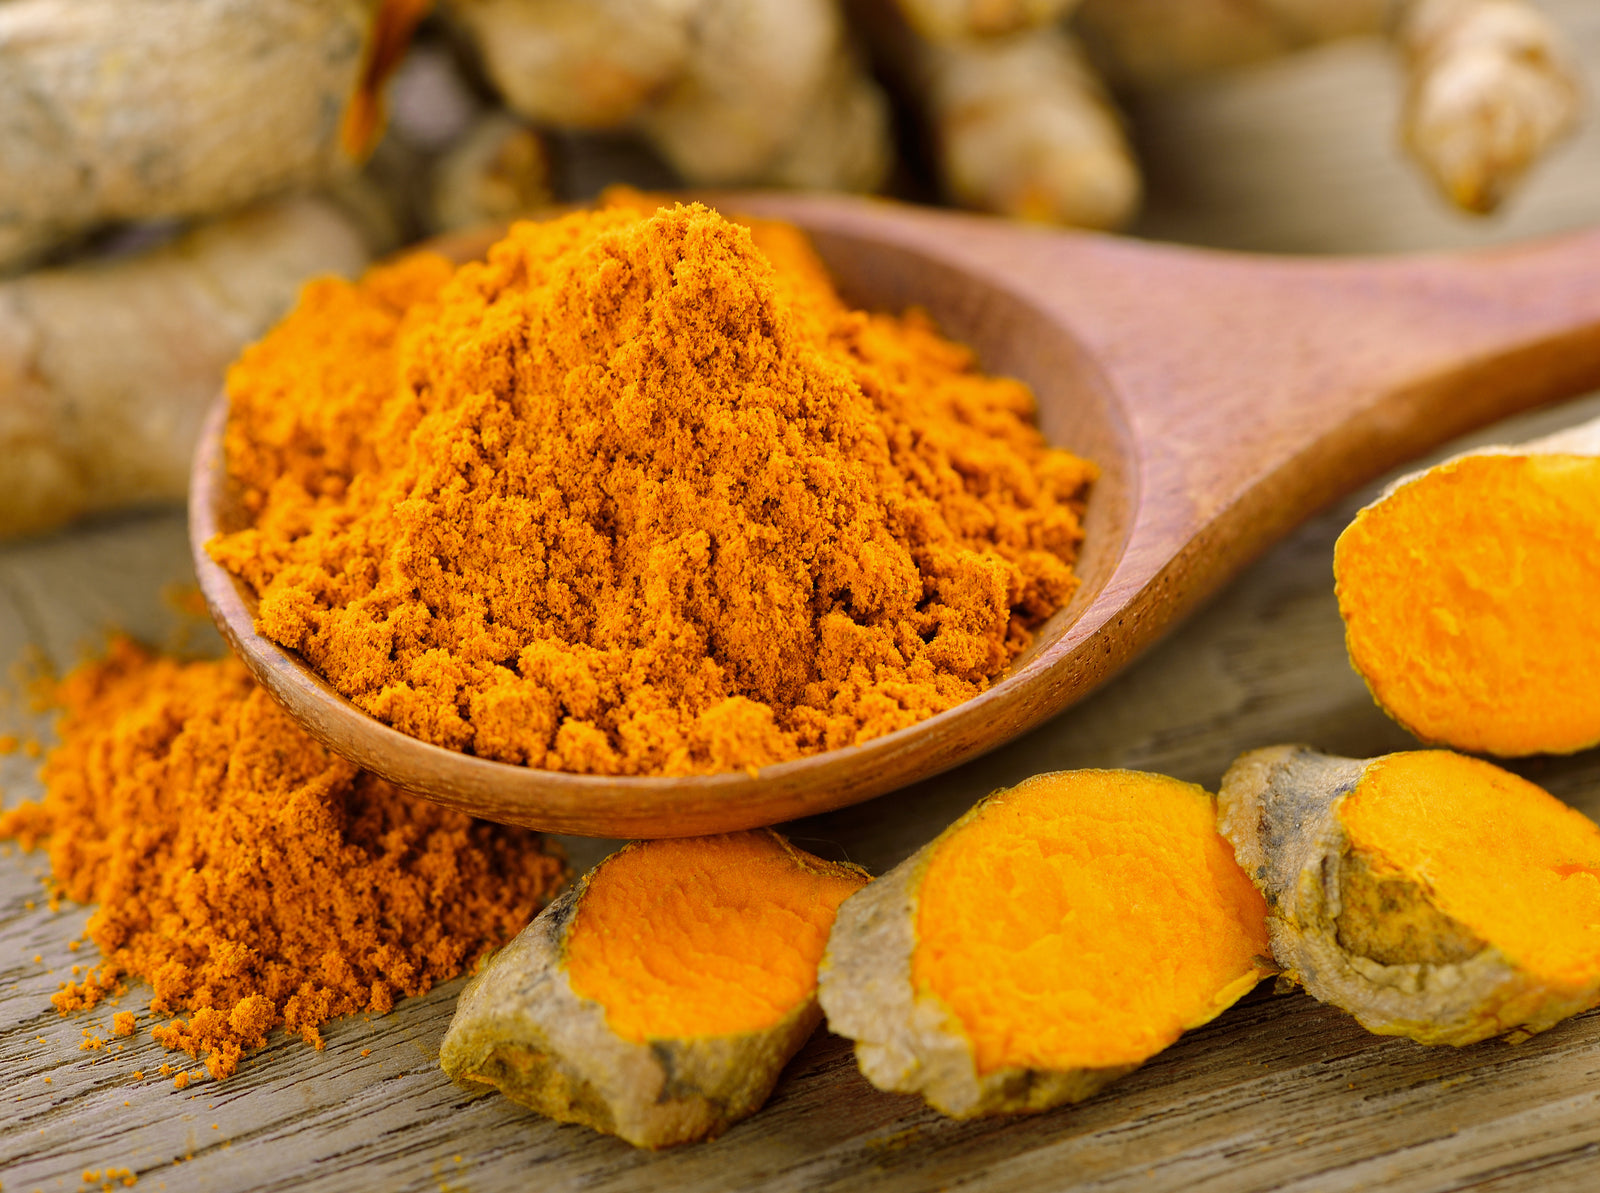 What Are the Side Effects of Turmeric?